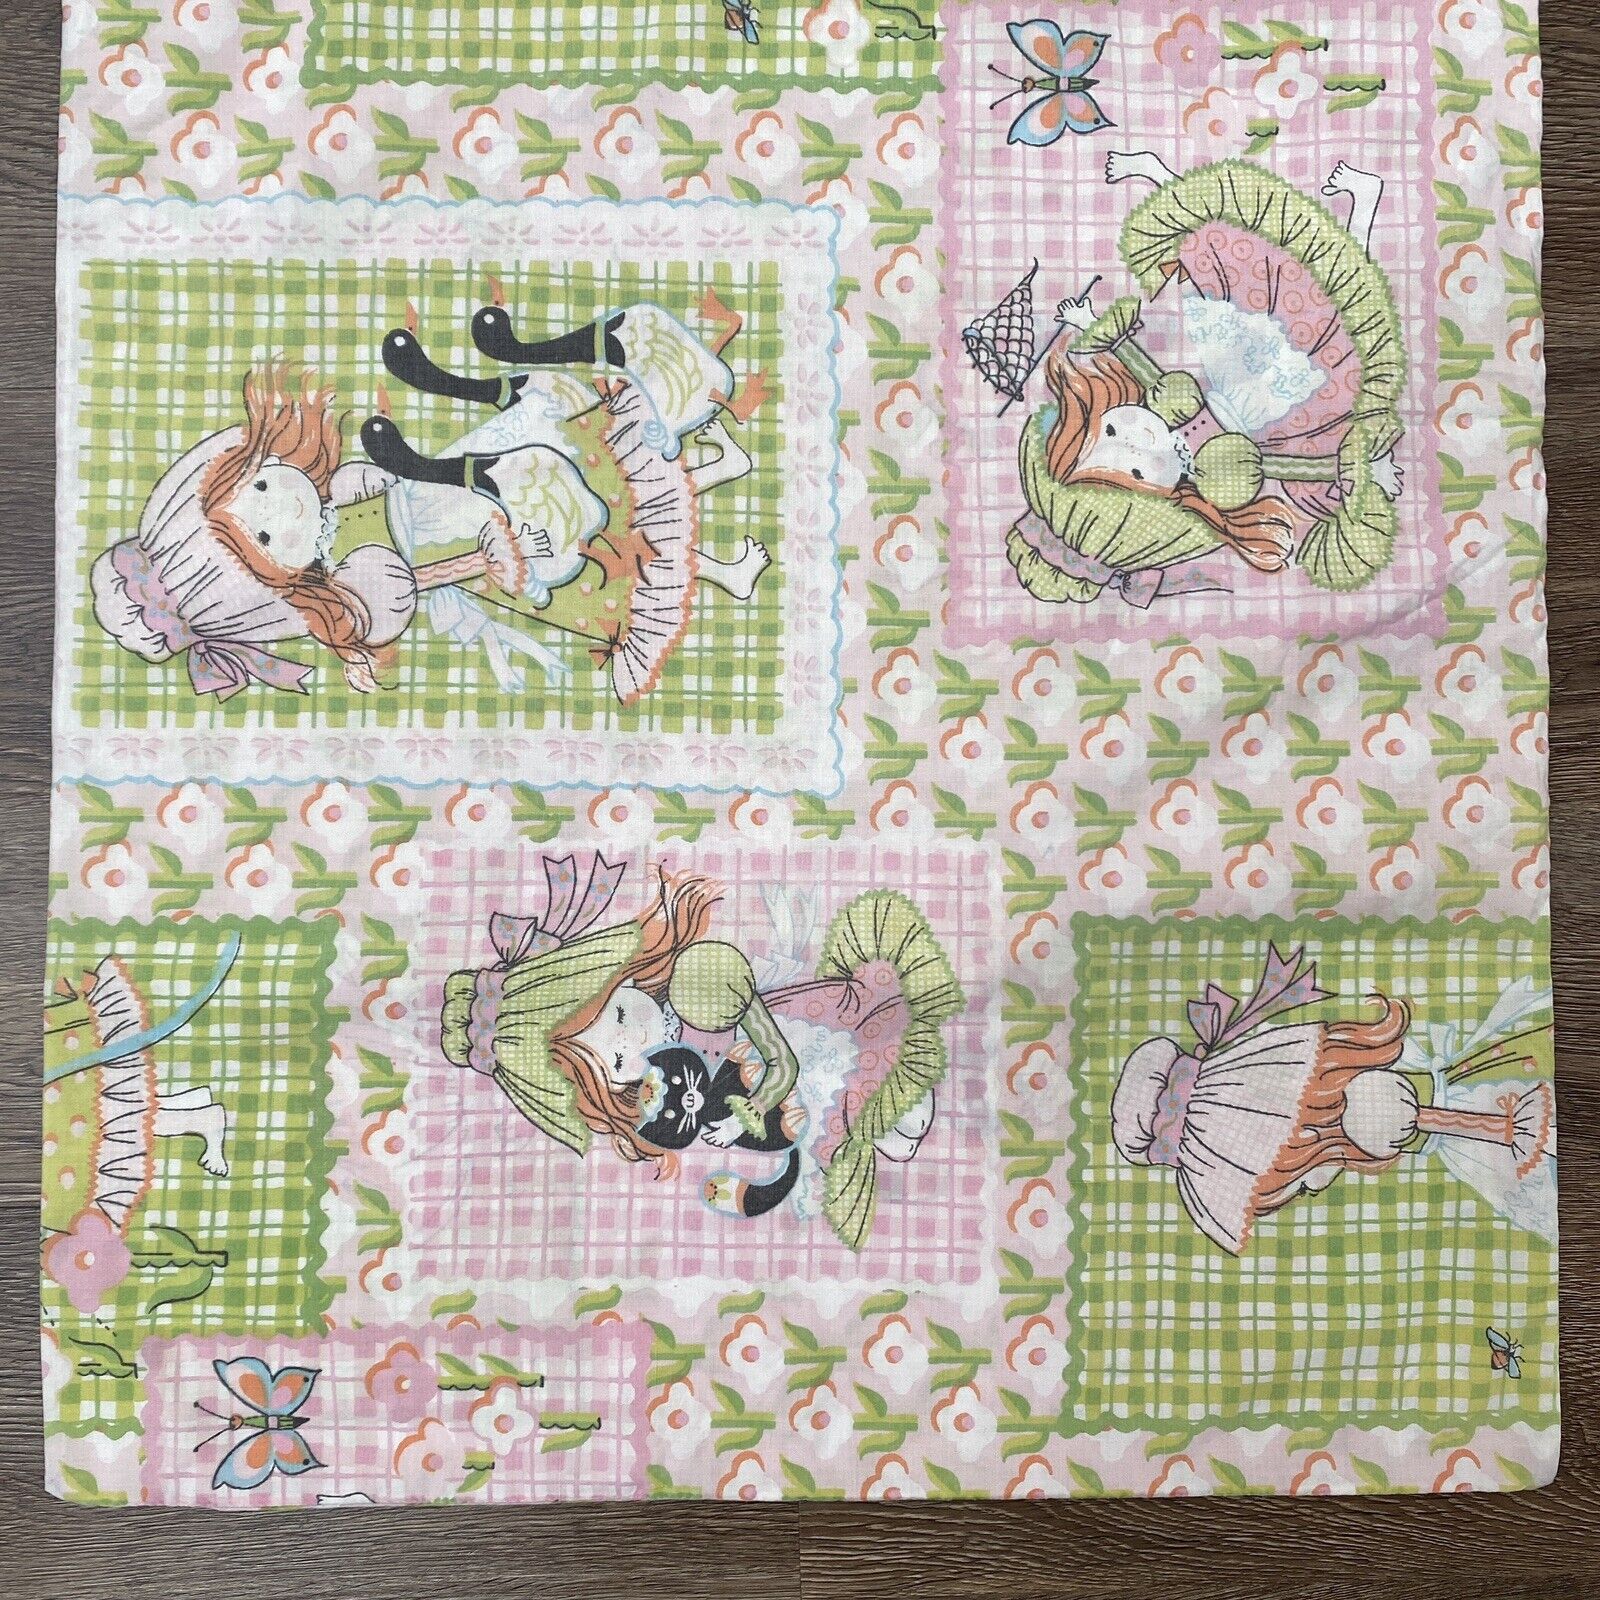 Vintage Holly Hobbie Katie\'s Patchwork Pillowcase Green Pink Faded